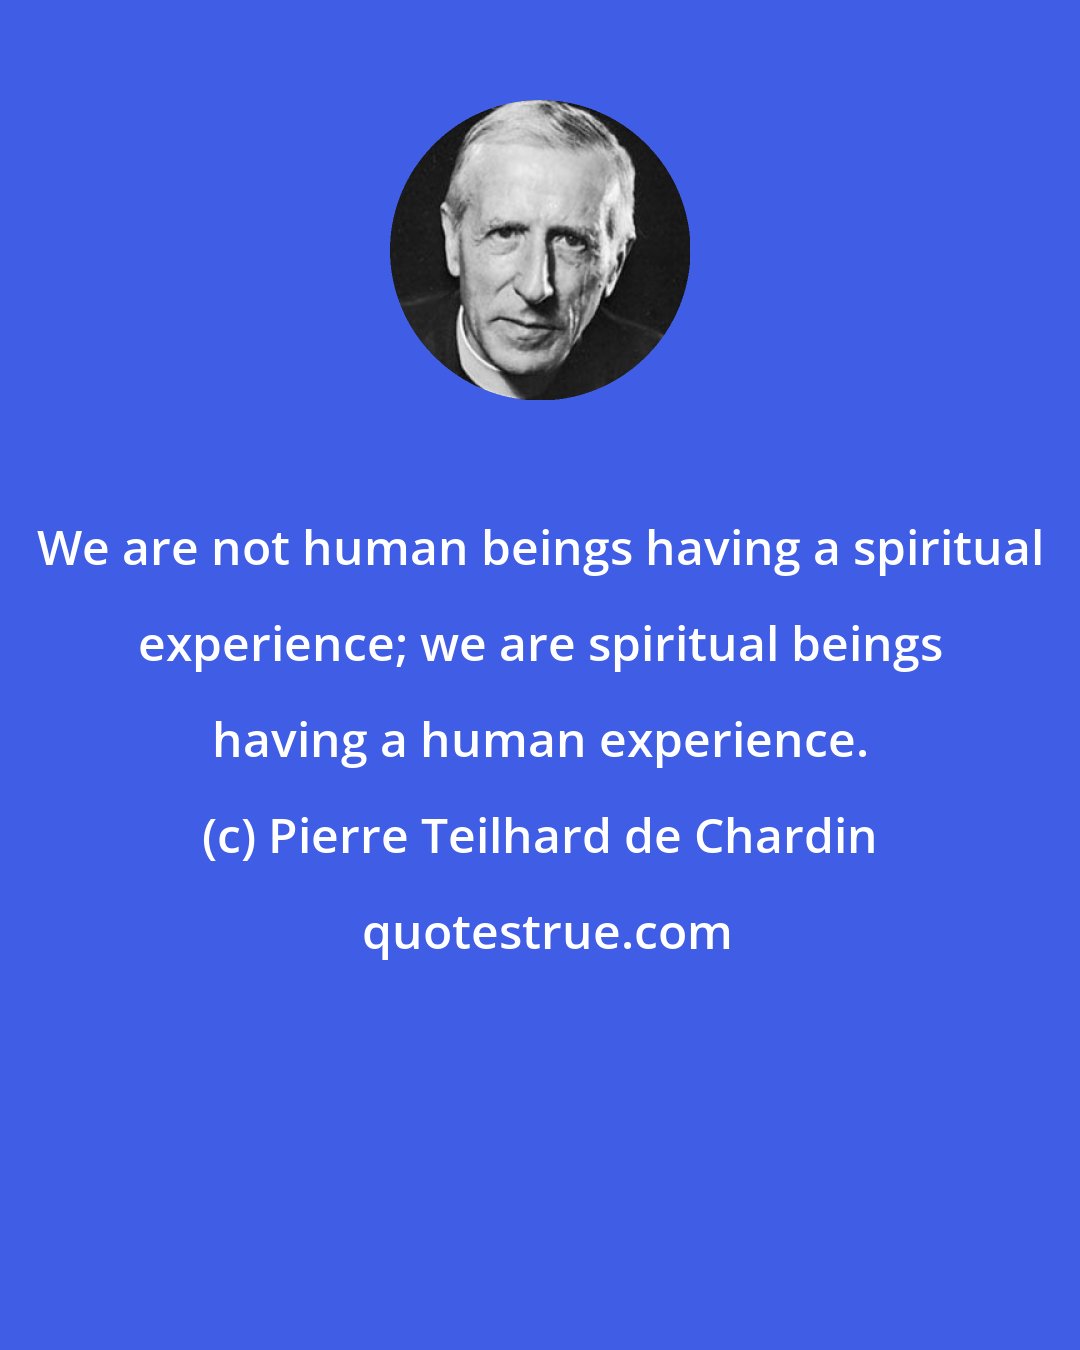 Pierre Teilhard de Chardin: We are not human beings having a spiritual experience; we are spiritual beings having a human experience.